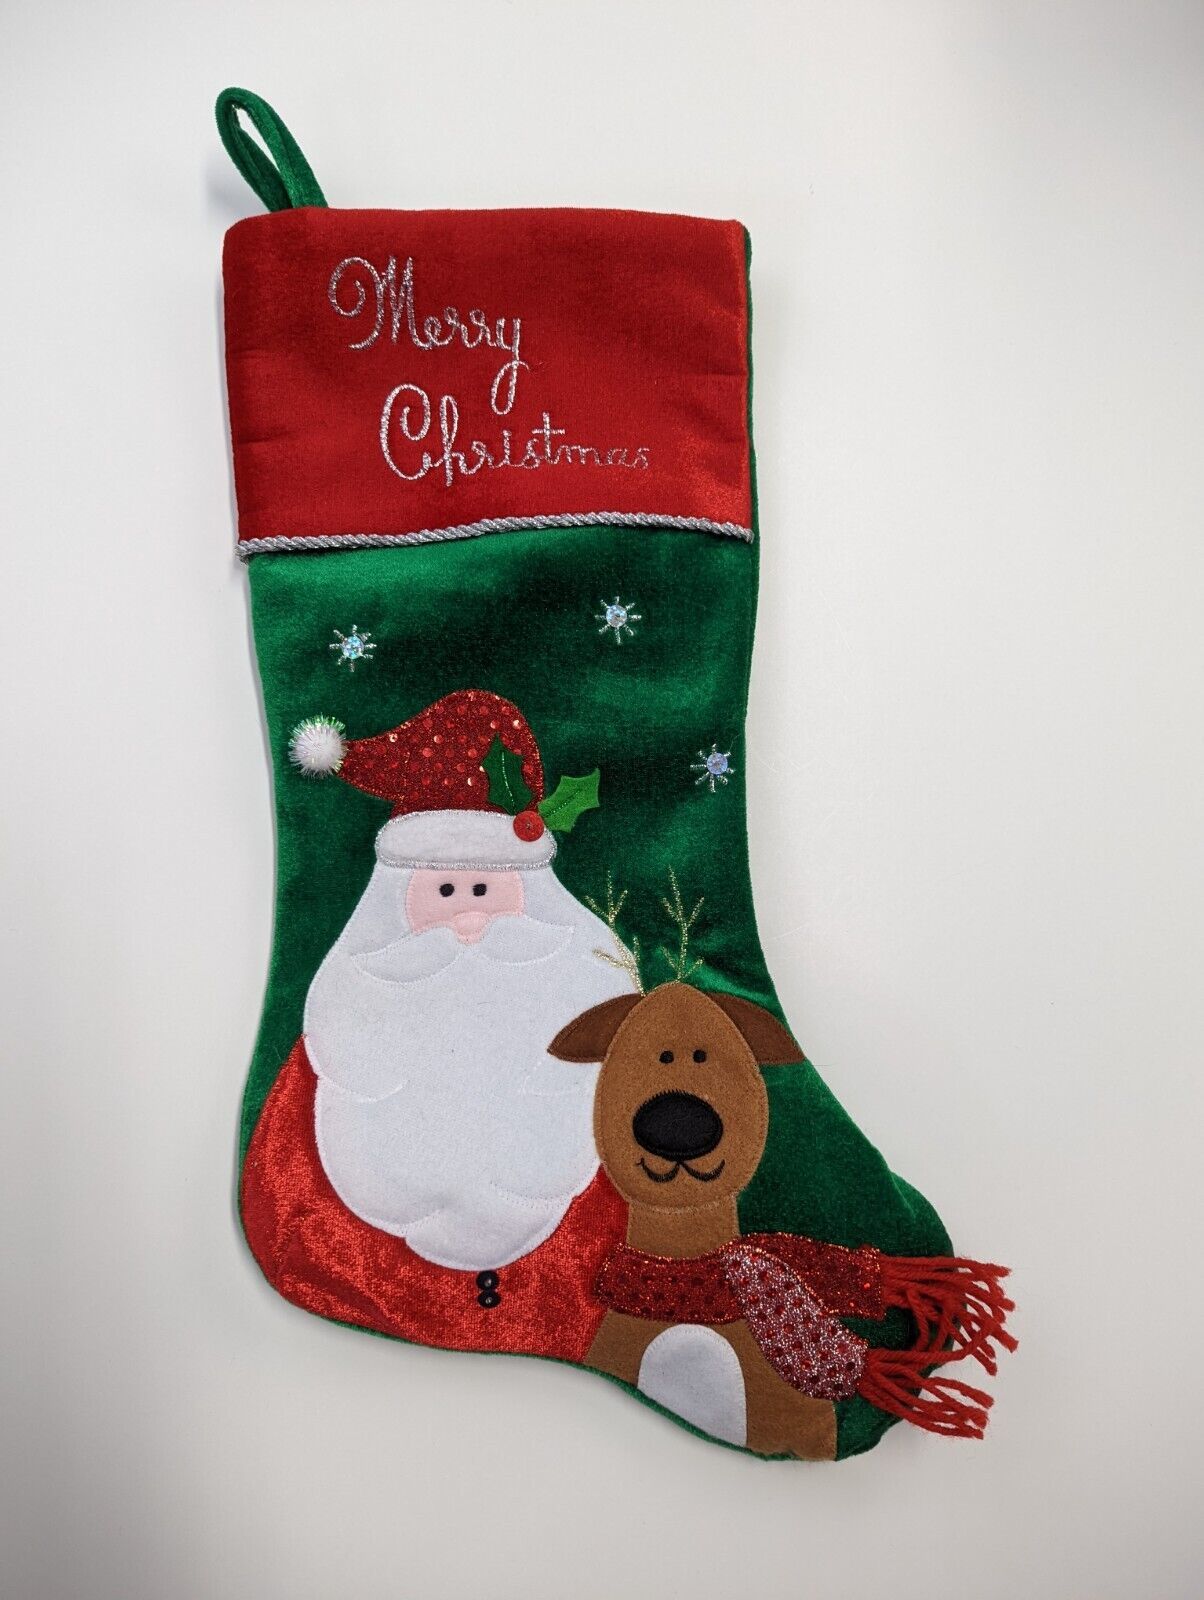 Santa Claus & Reindeer Christmas Stocking green, red,silver Merry Christmas 20.5 - $8.00